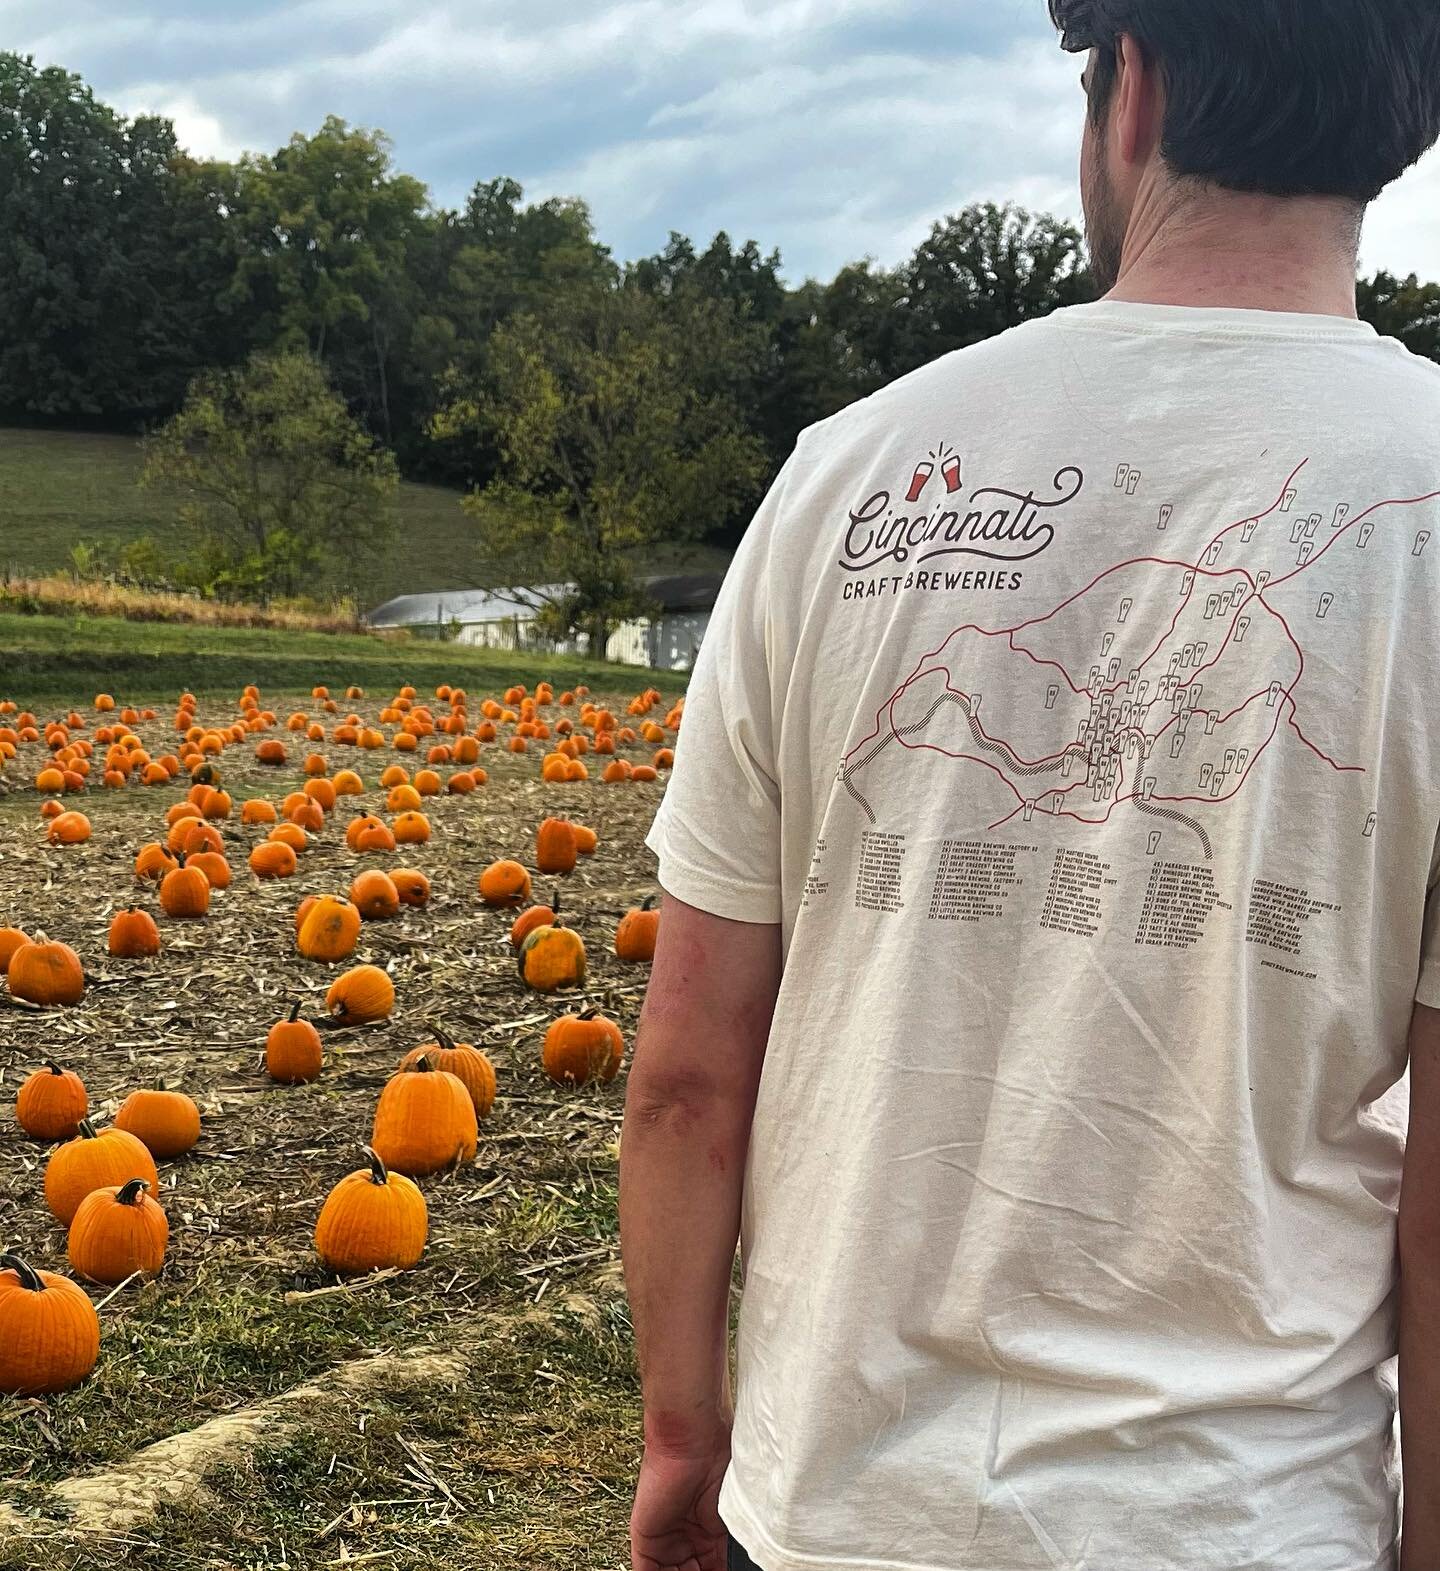 Best thing about Fall is all the pumpkin flavored beers available!! So many beers to try, so little time. 🎃🎃
peep the brew map tee, link in bio 

#pumpkinale #fallbeerseason #cincybrewmap #pumpkin